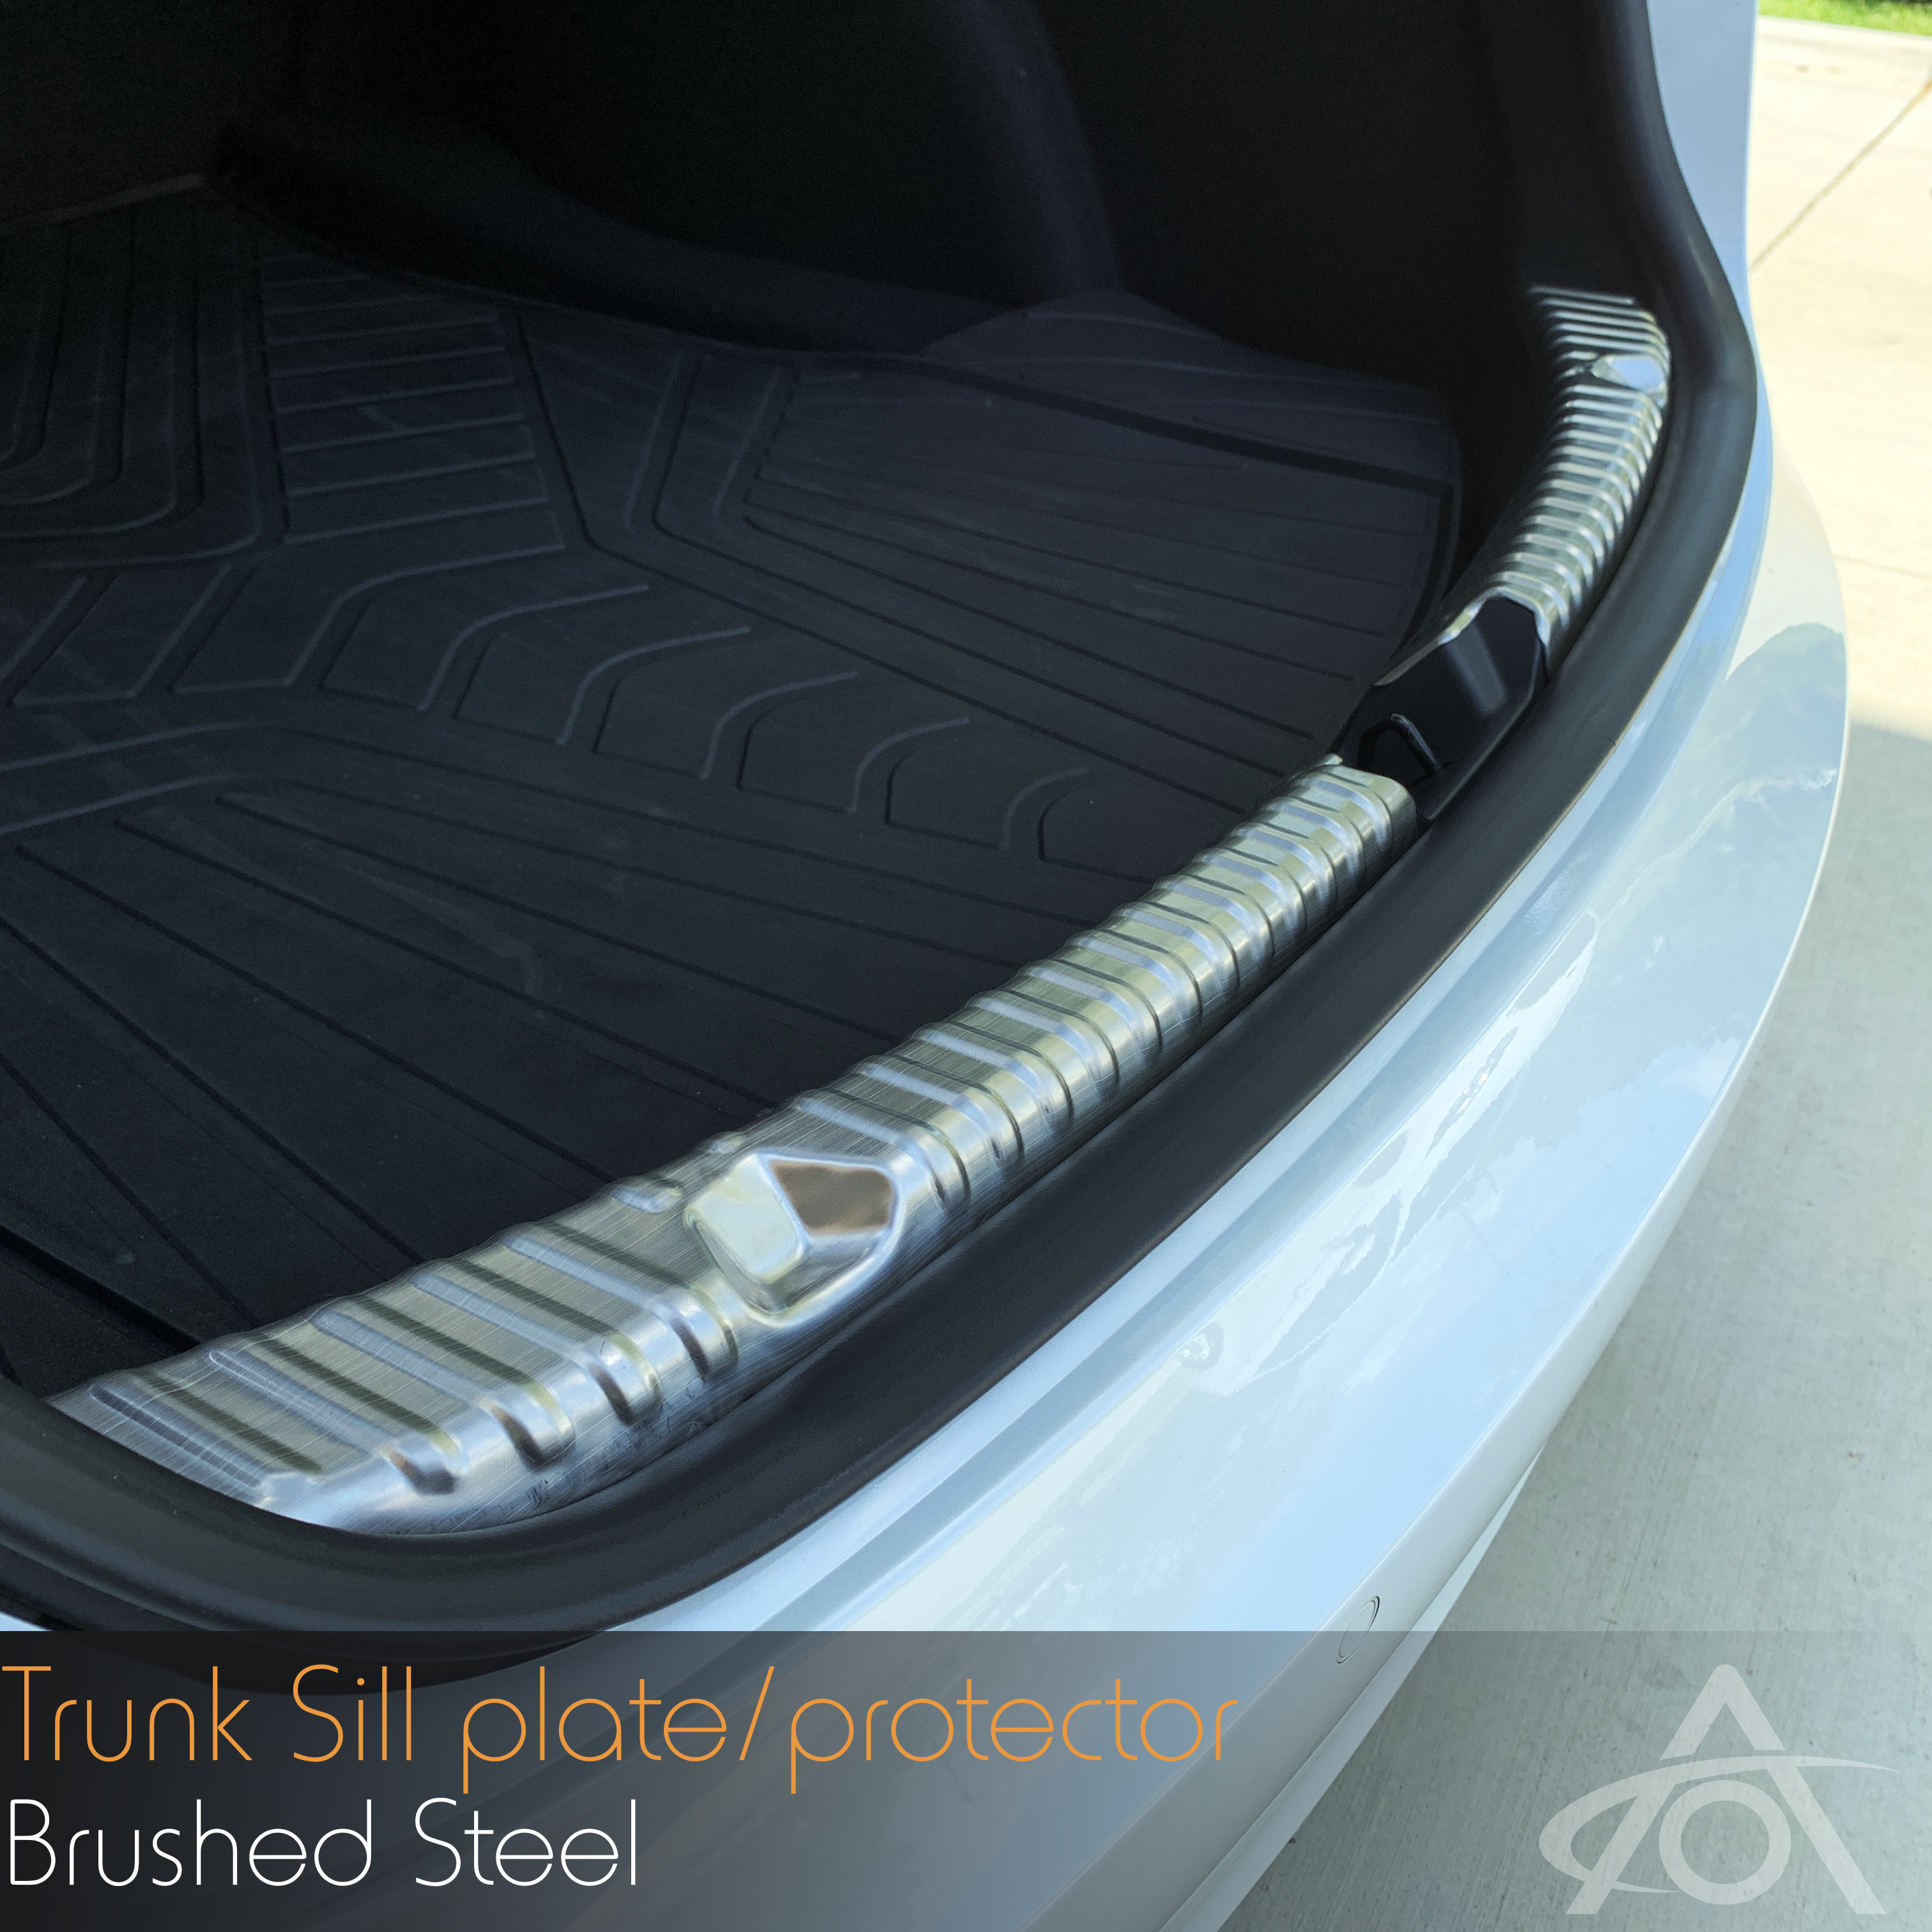 Trunk sill protector in Brushed Steel